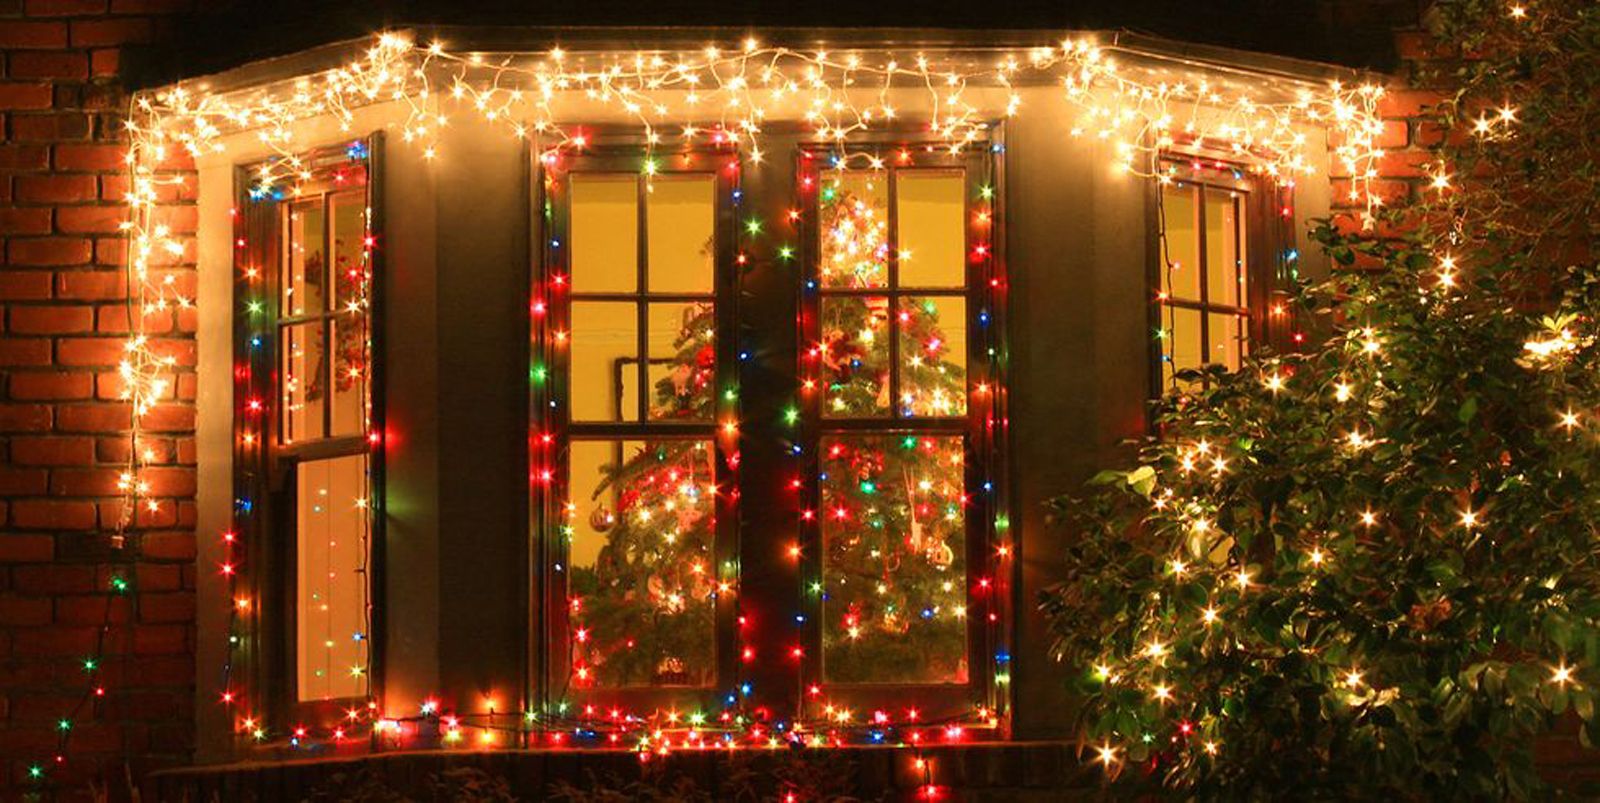 Lighting - 8 Ways to Decorate Your Timber Windows at Christmas